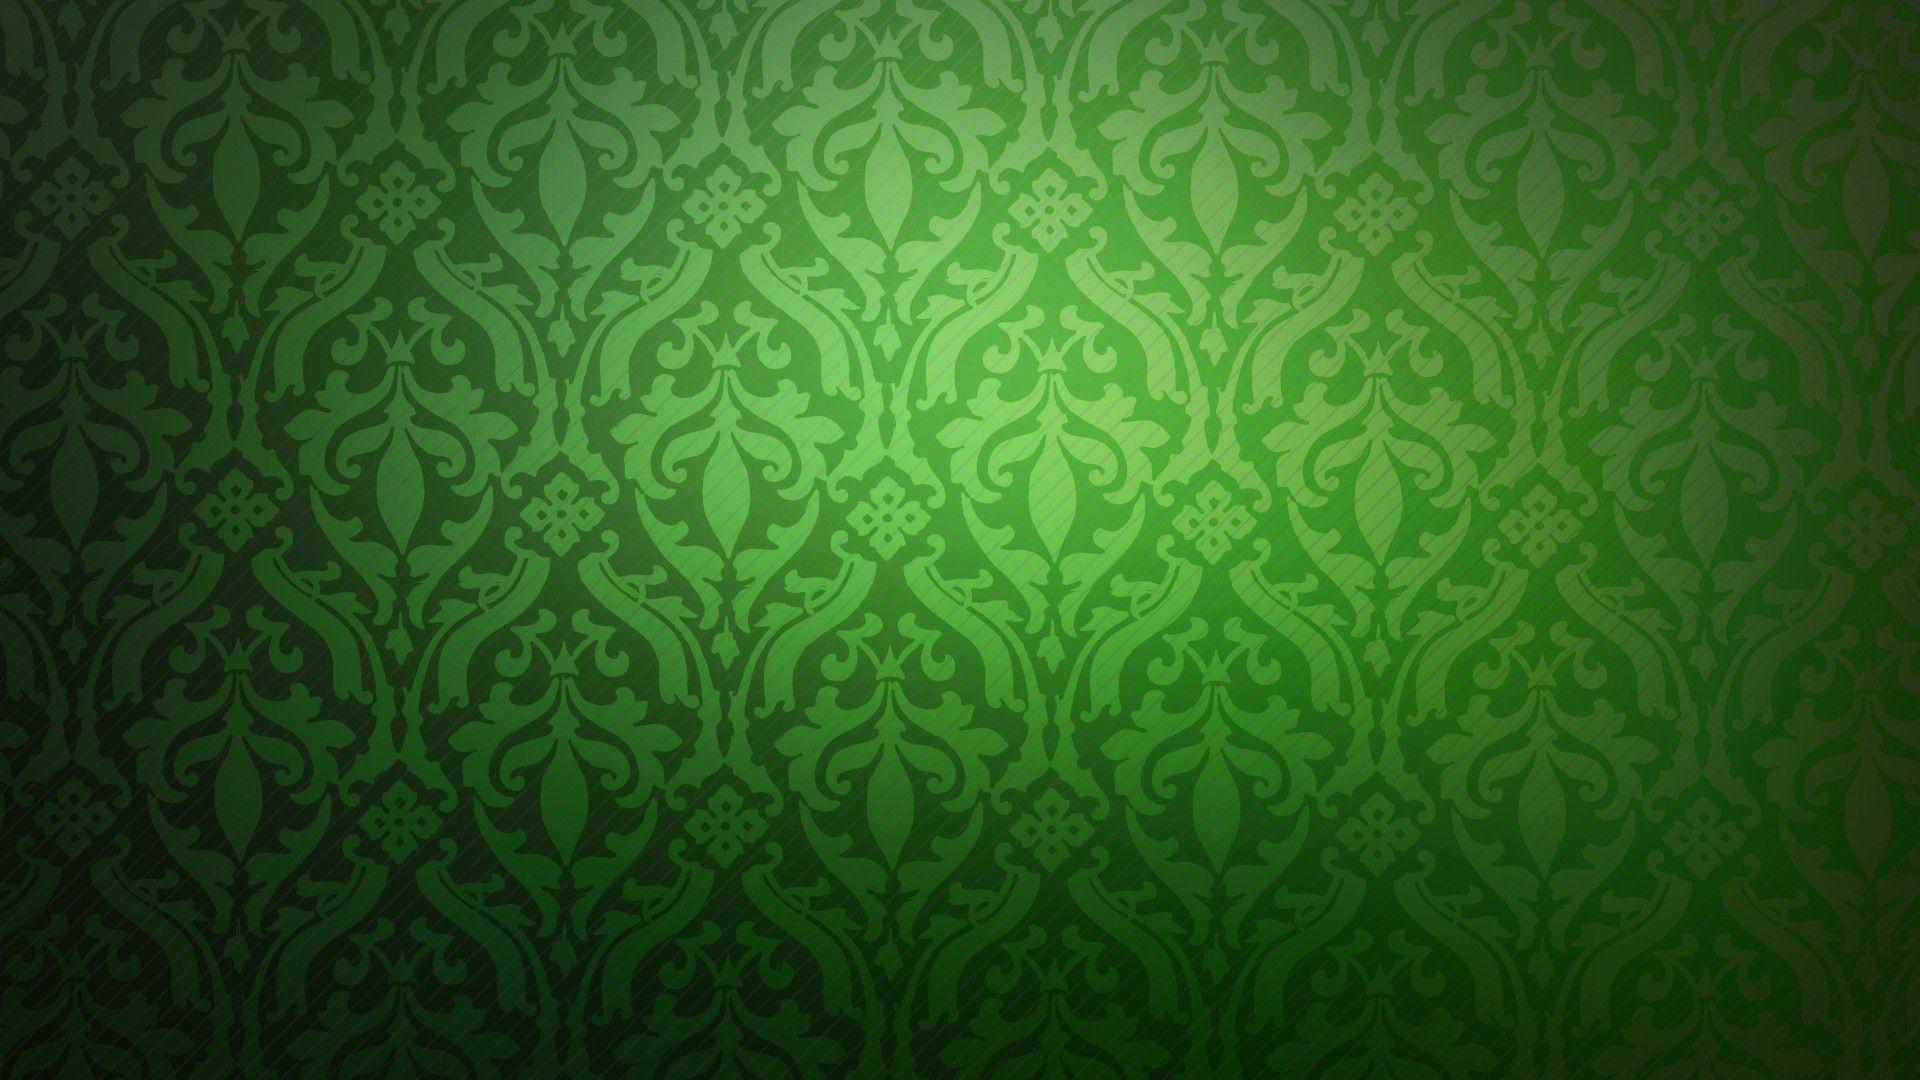 green screen background images free download